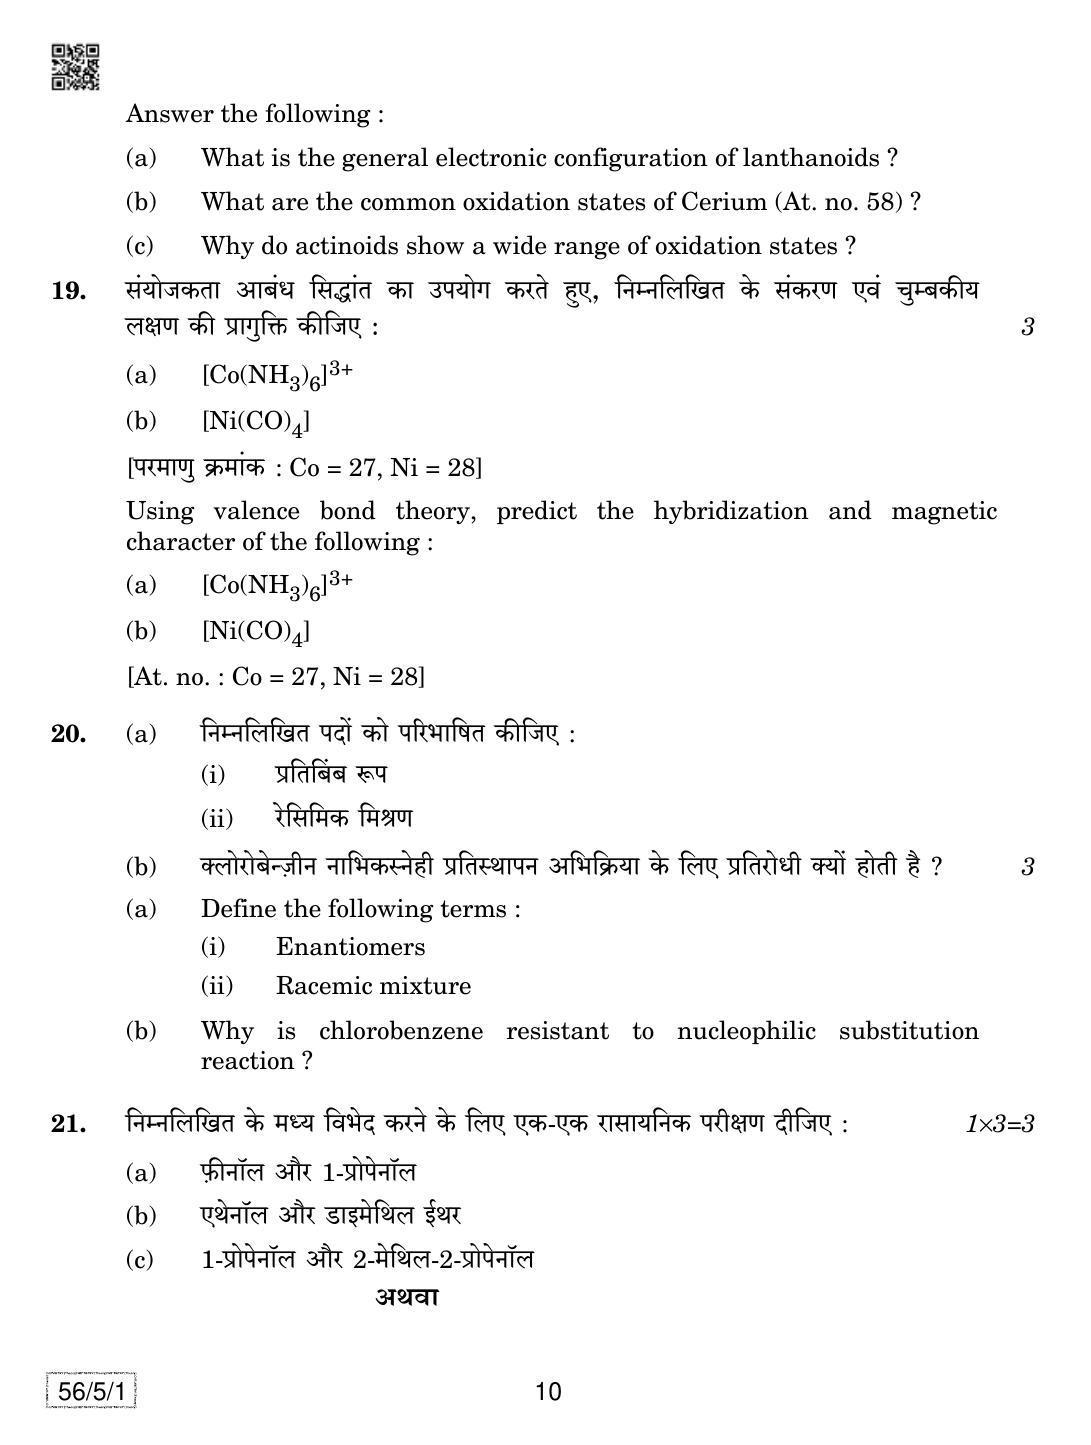 CBSE Class 12 56-5-1 Chemistry 2019 Question Paper - Page 10